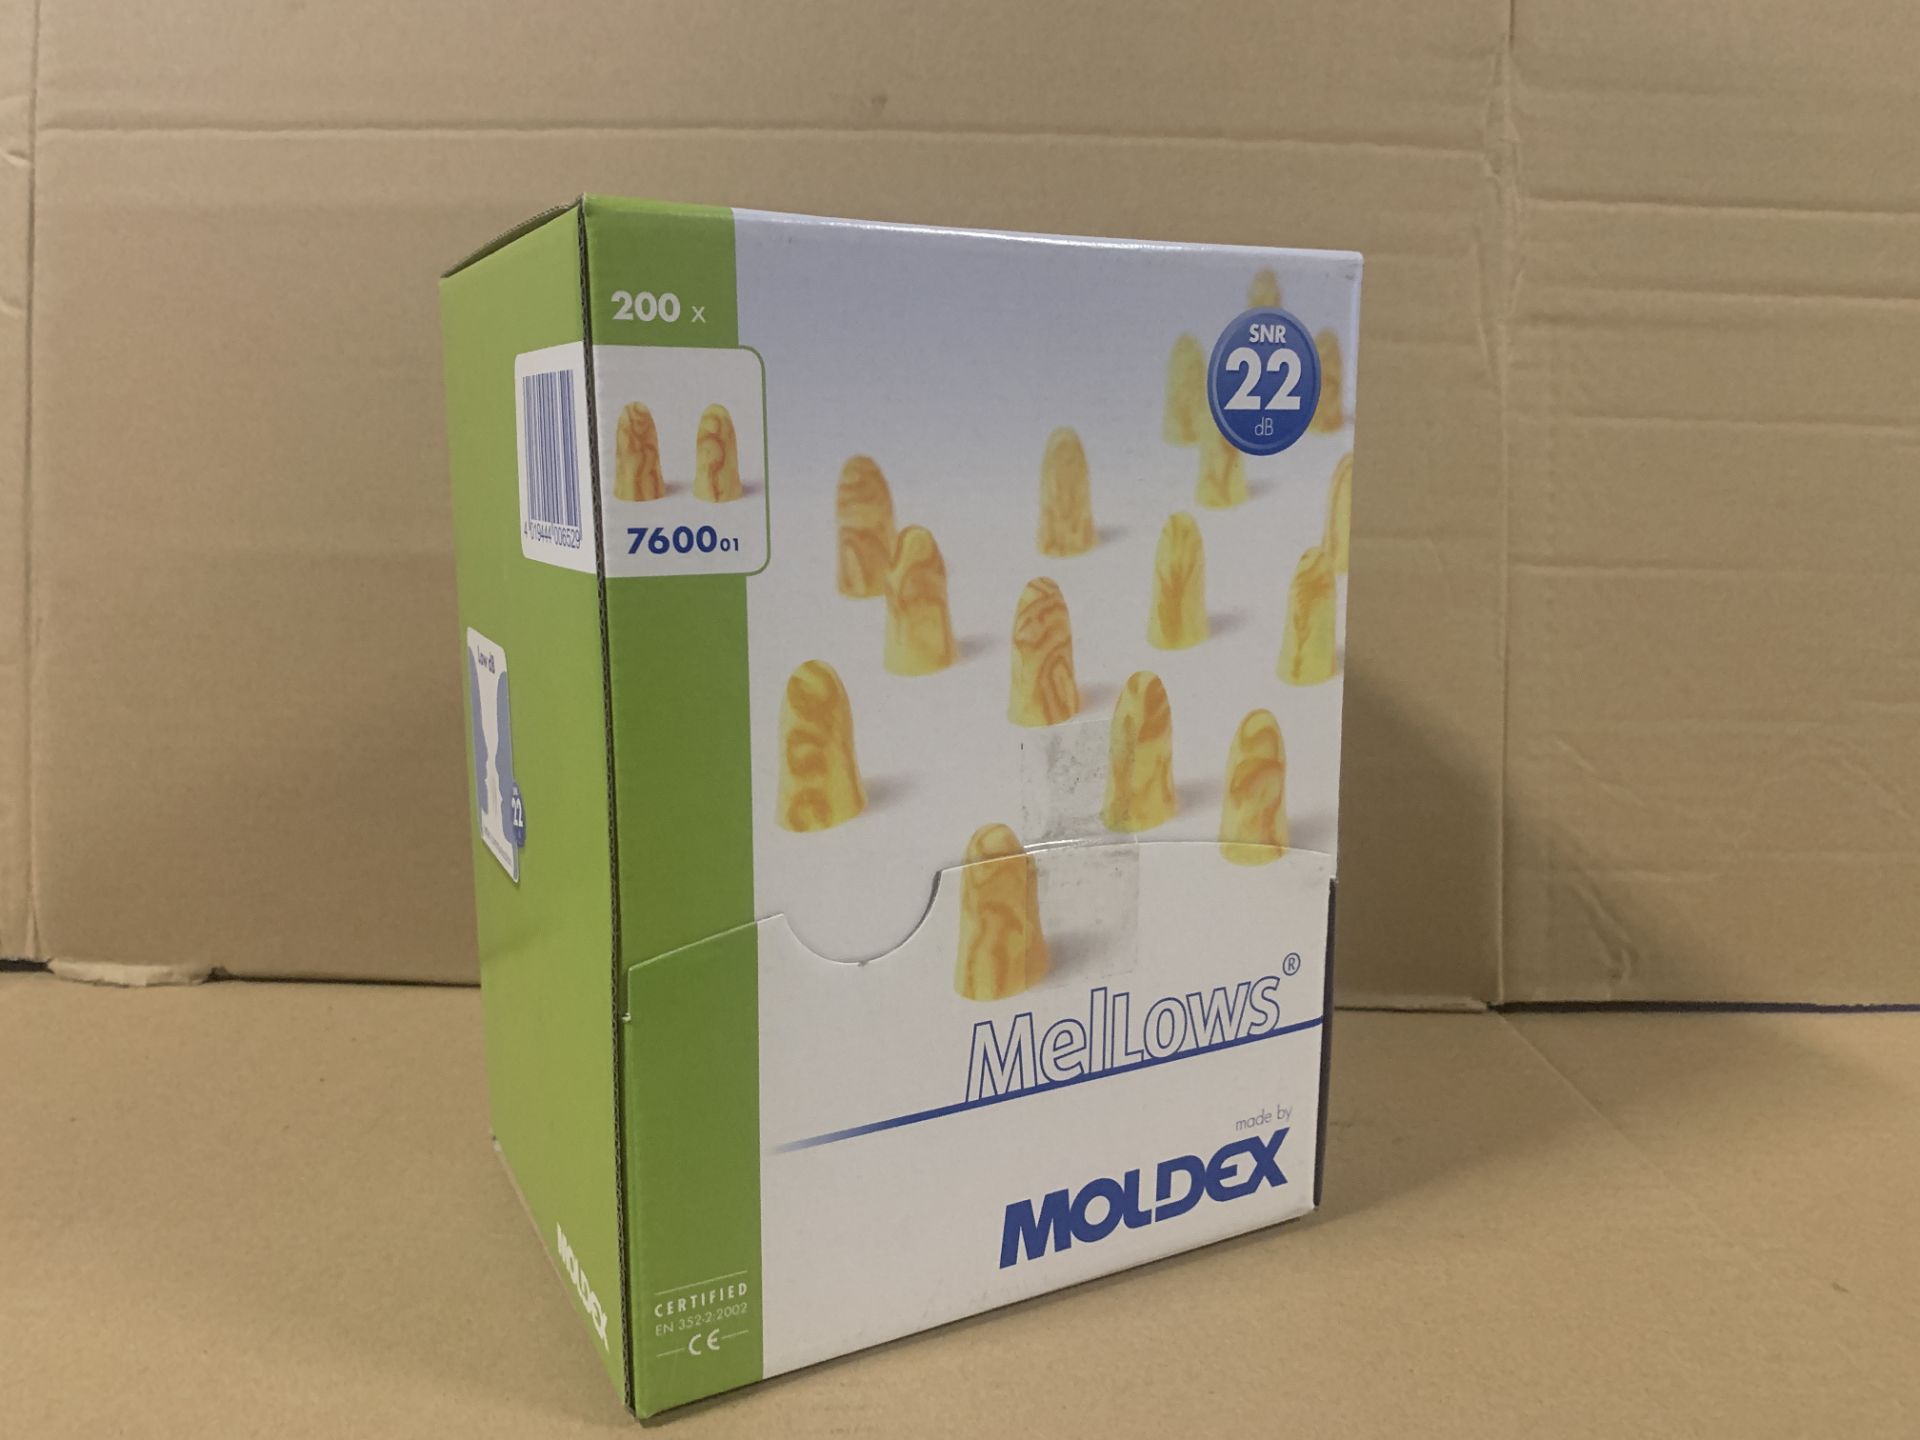 7 X BRAND NEW PACKS OF 200 MOLDEX MELLOWS DISPOSABLE EARPLUGS S1-15